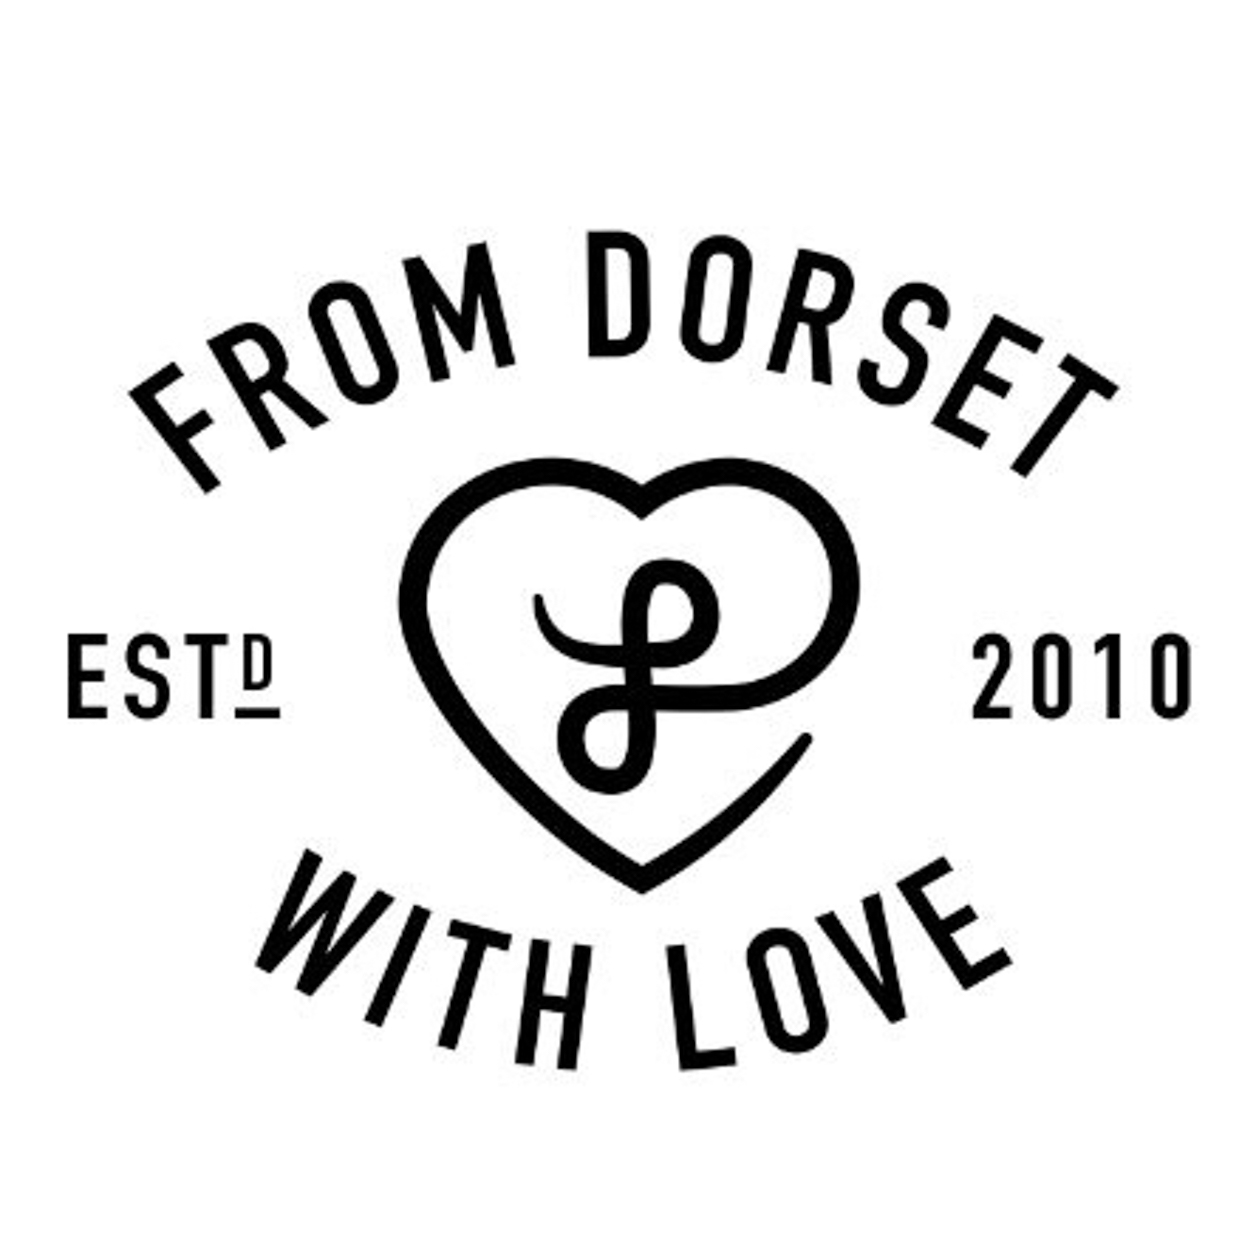 Interview with the founders of From Dorset With Love